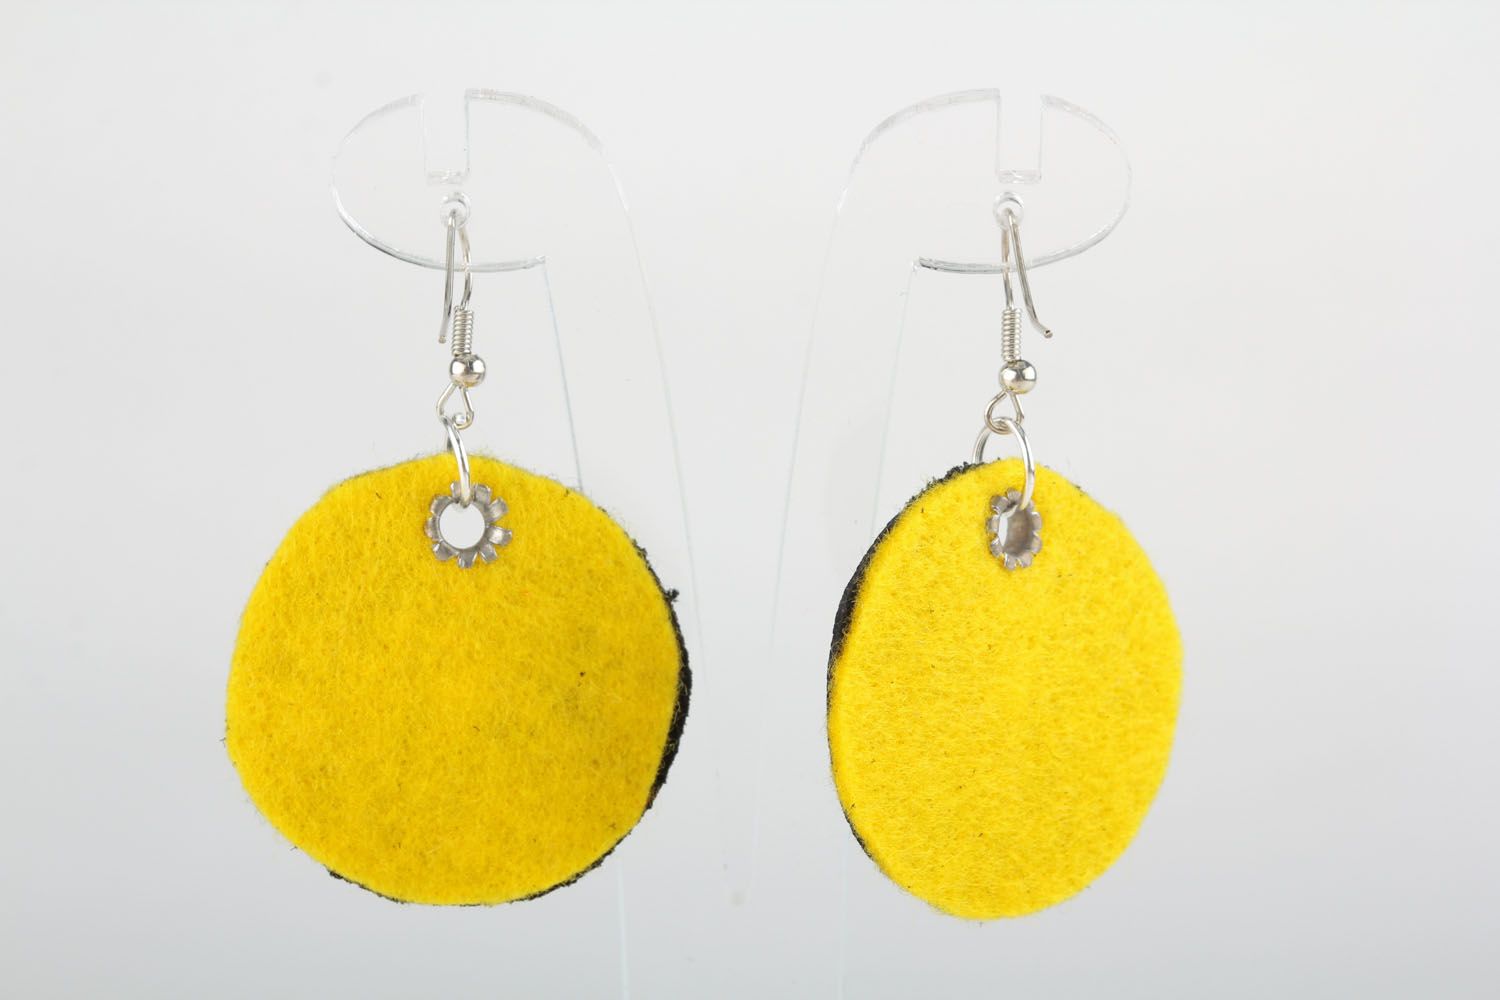 Women's earrings made of leather and felt photo 3